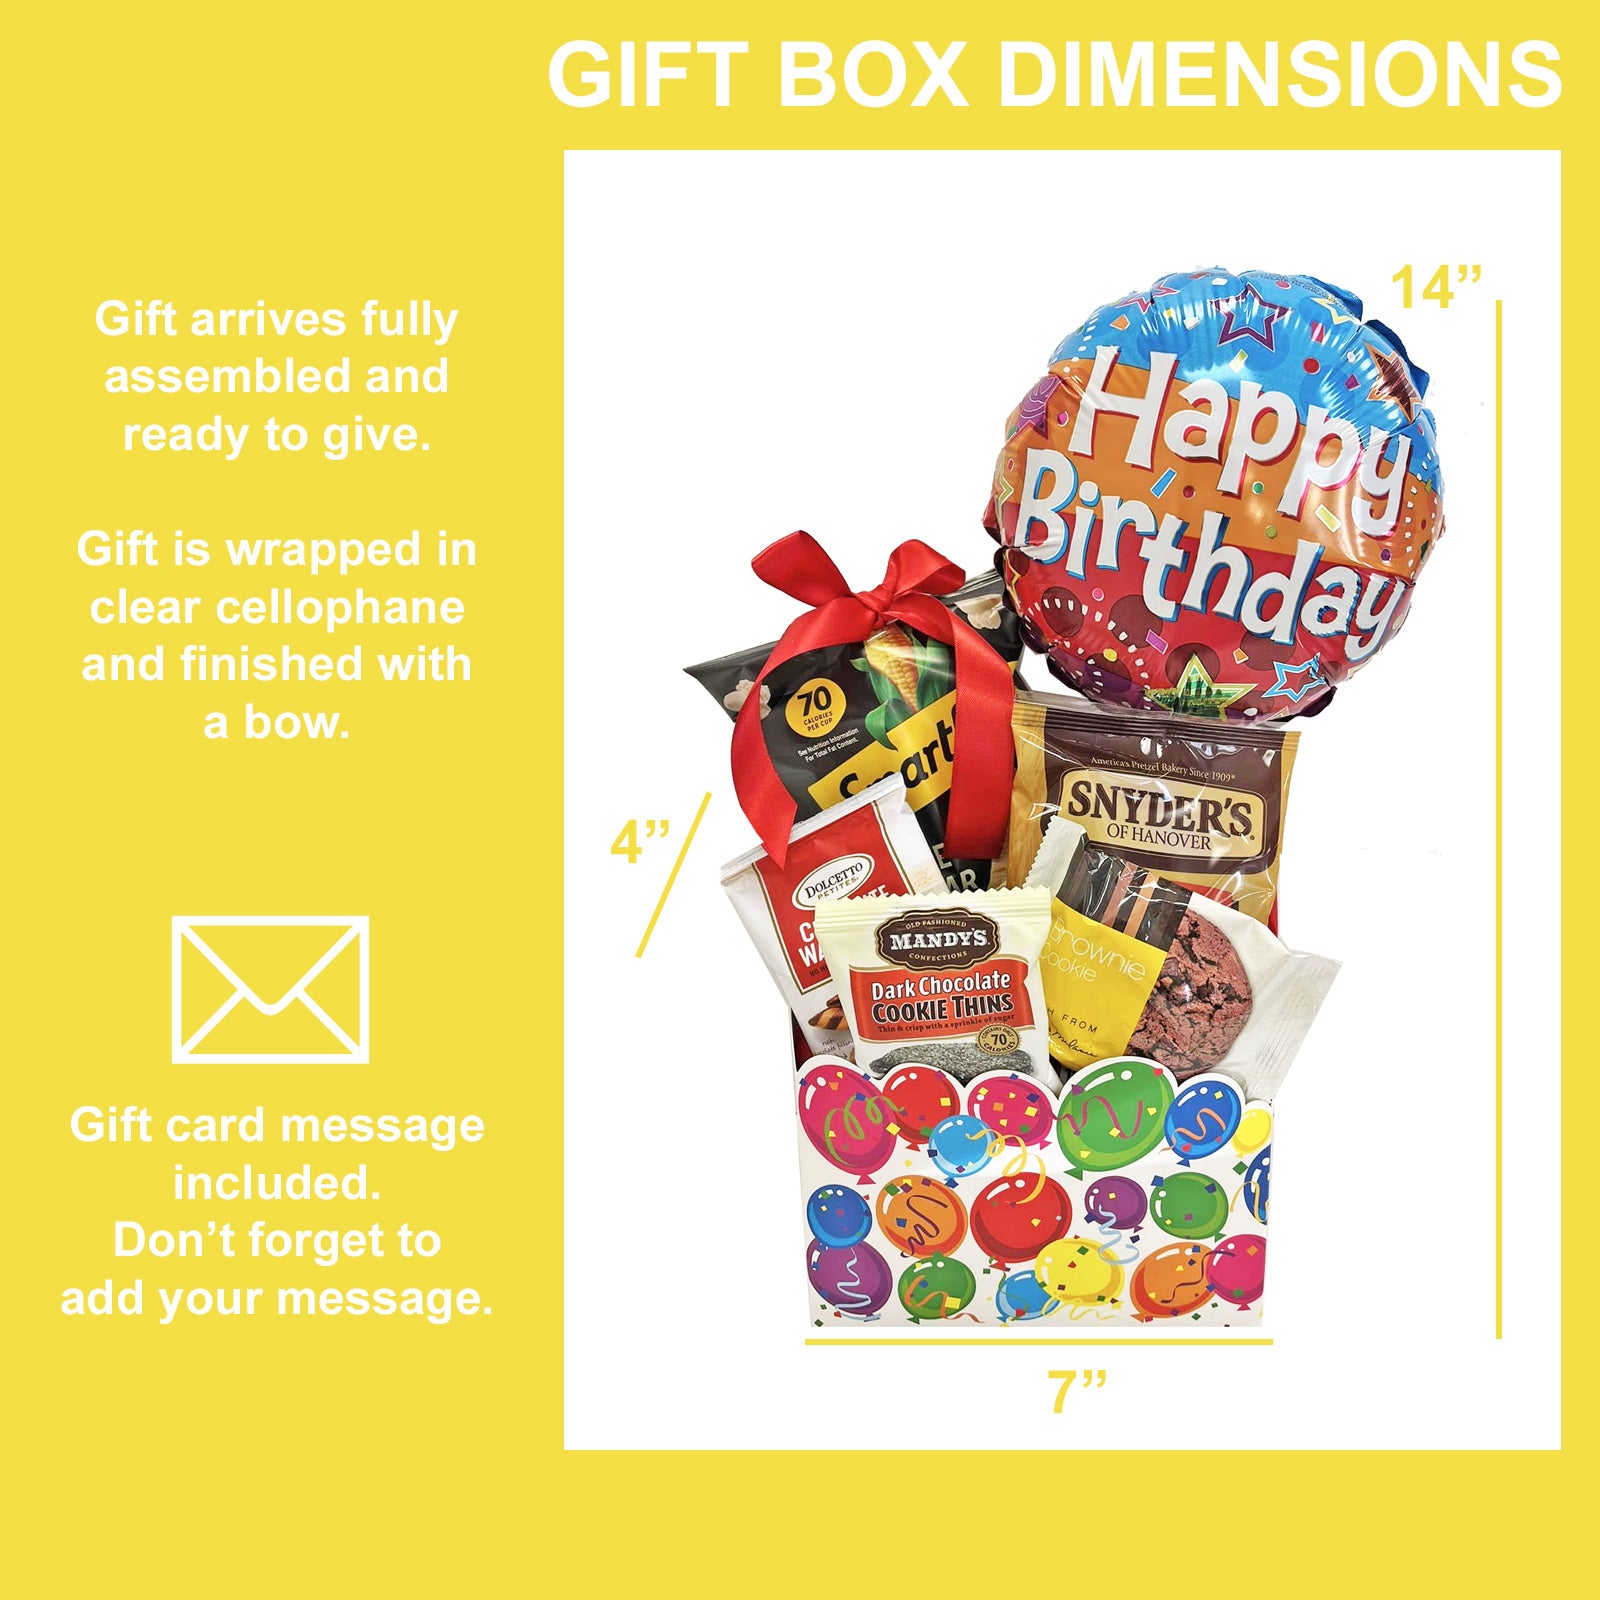 Birthday Gift Box with Cookies and Snacks and Happy Birthday Balloon for Men, Women, Friends and Family Unisex Birthday Gift Set Design for Her and for Him on their Birthday